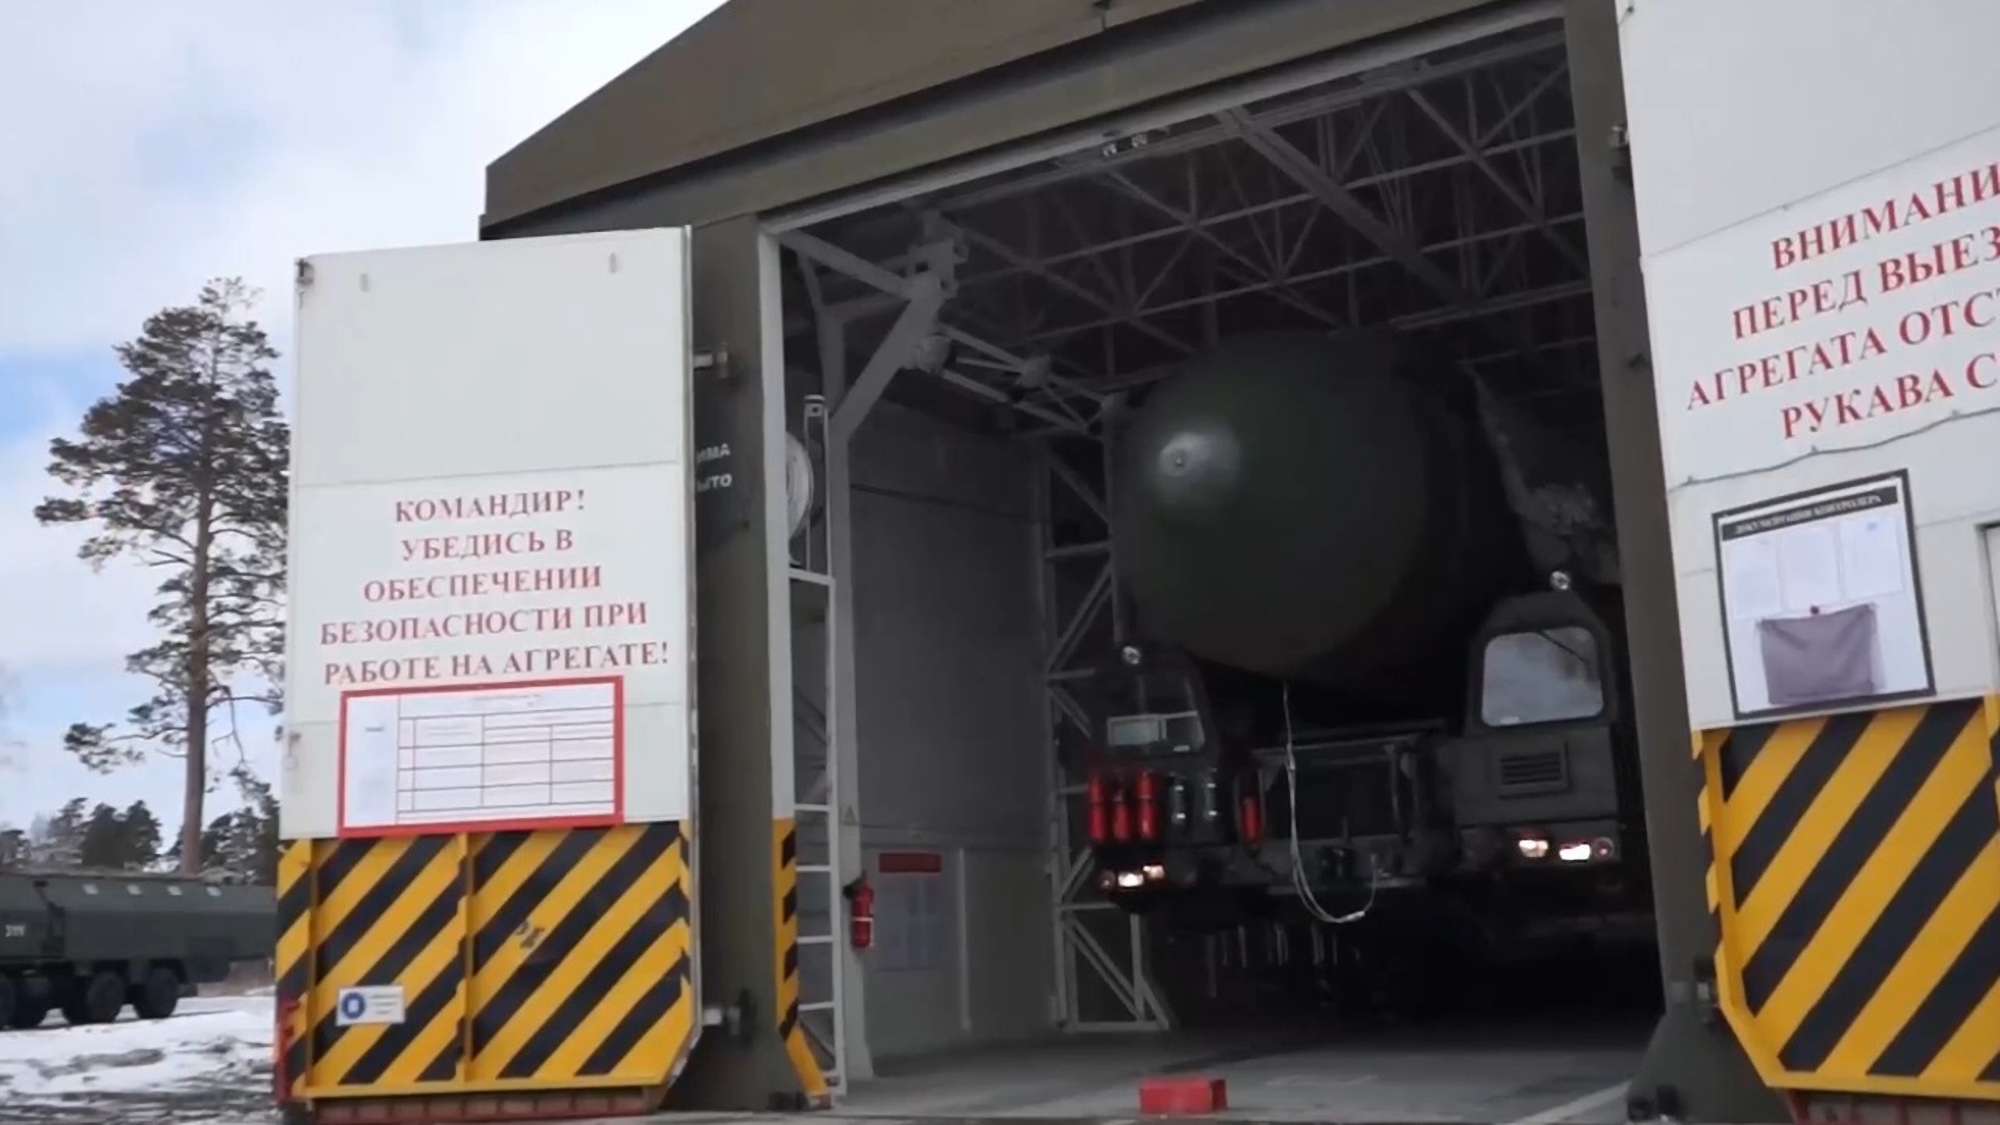 Read more about the article Russia Shows Thermonuclear Intercontinental Ballistic Missile Being Deployed For Exercise In Siberia